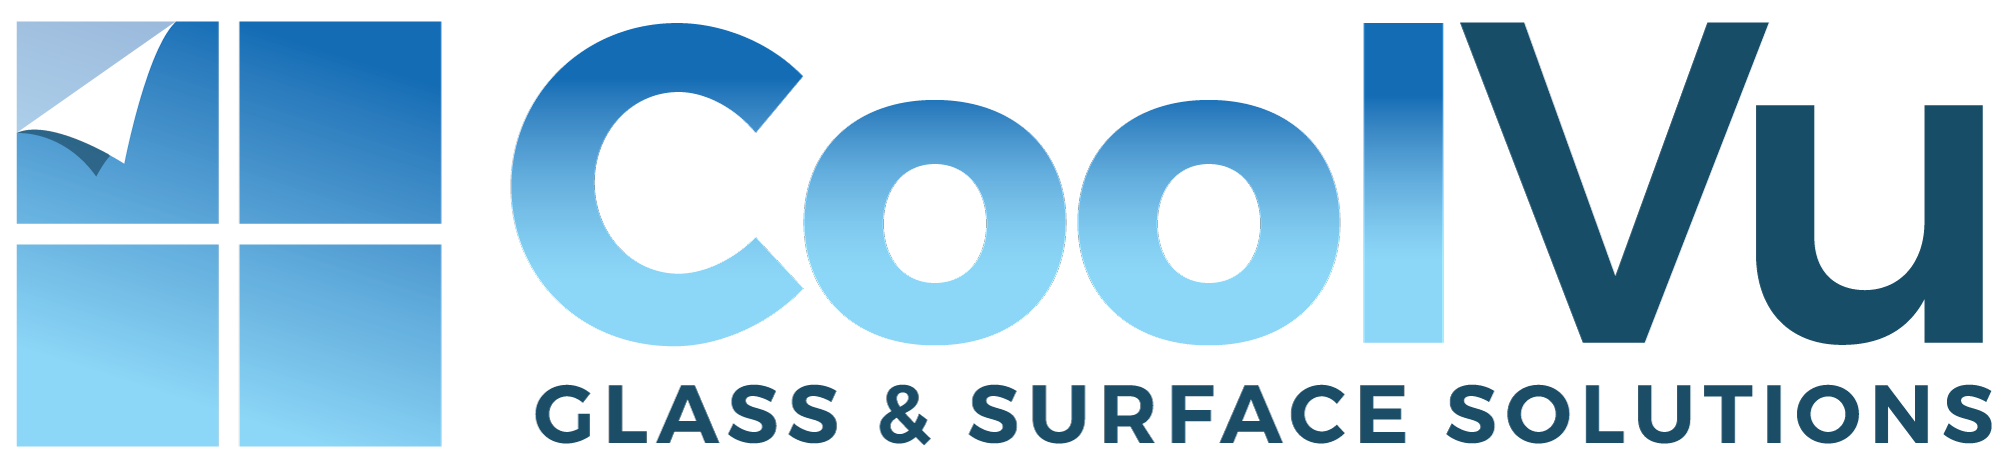 CoolVu Glass and Surface Solutions Logo